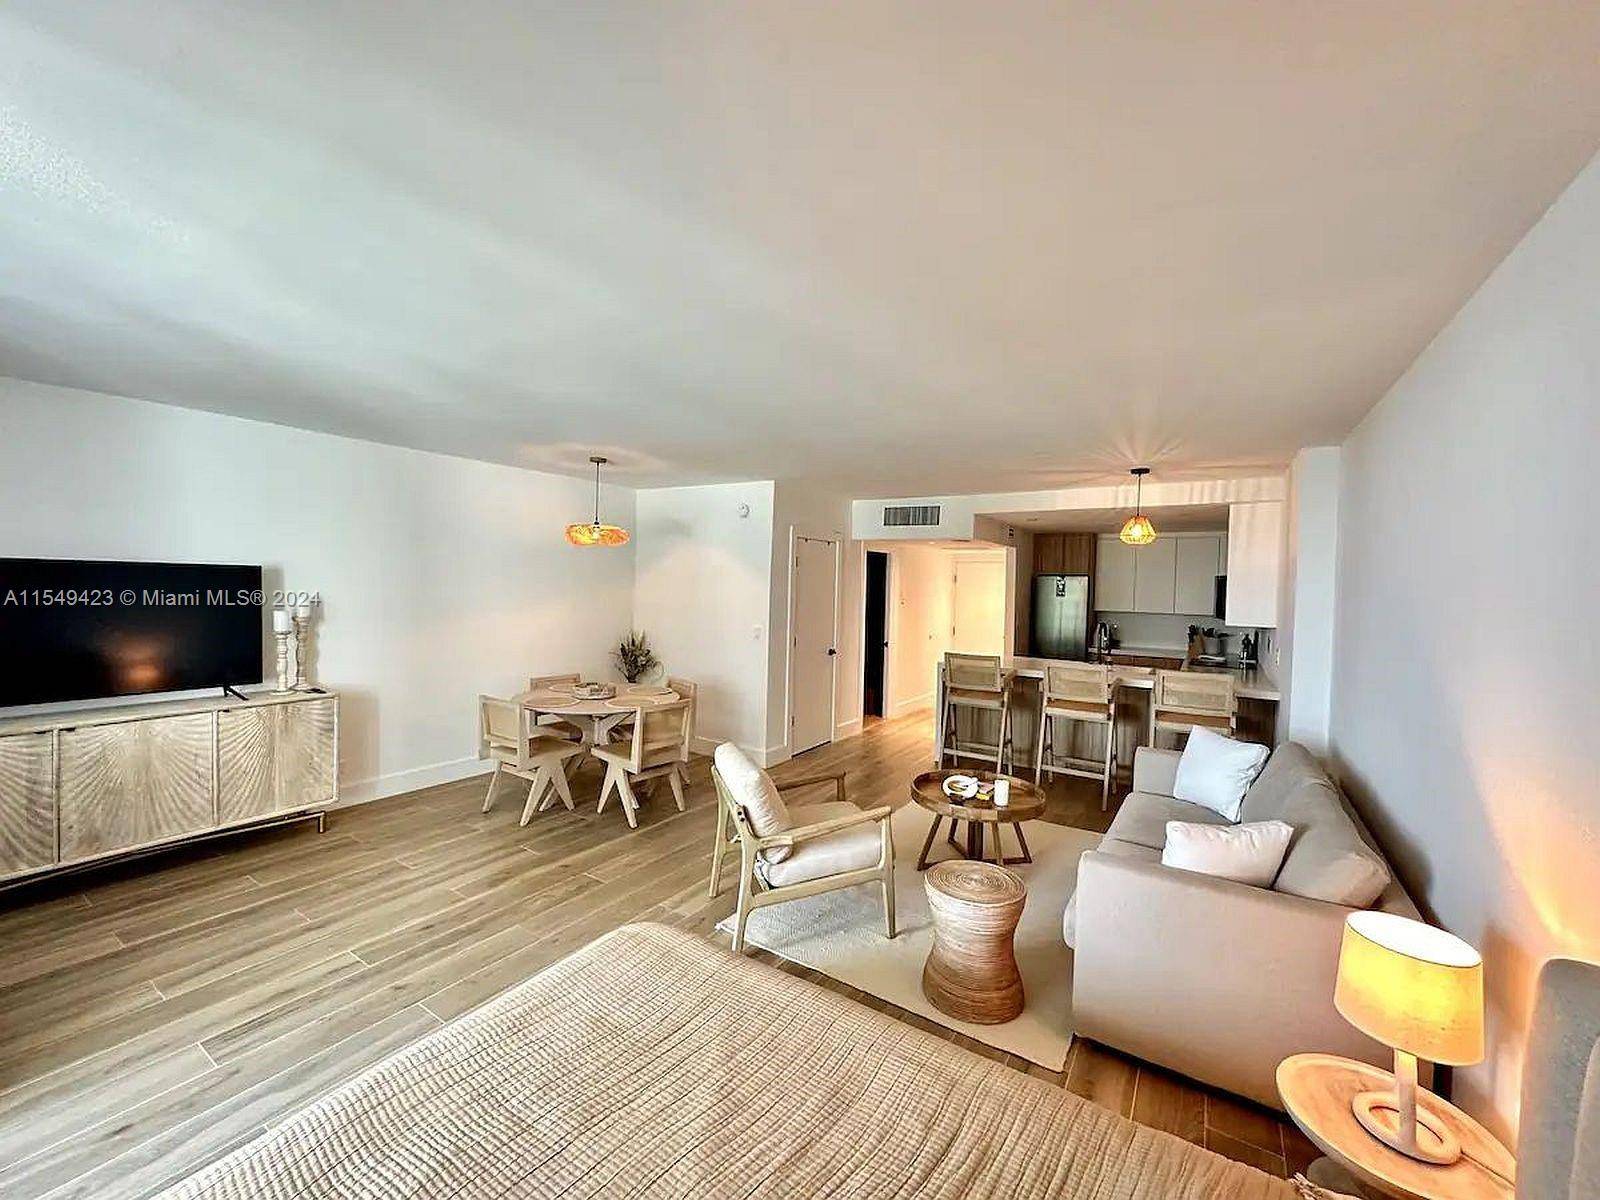 Based on a comparable nightly rate, enjoying all of the luxurious amenities of the 5 star 1 Hotel in SoBe, this private furnished residence is an exquisite and generously proportioned ...